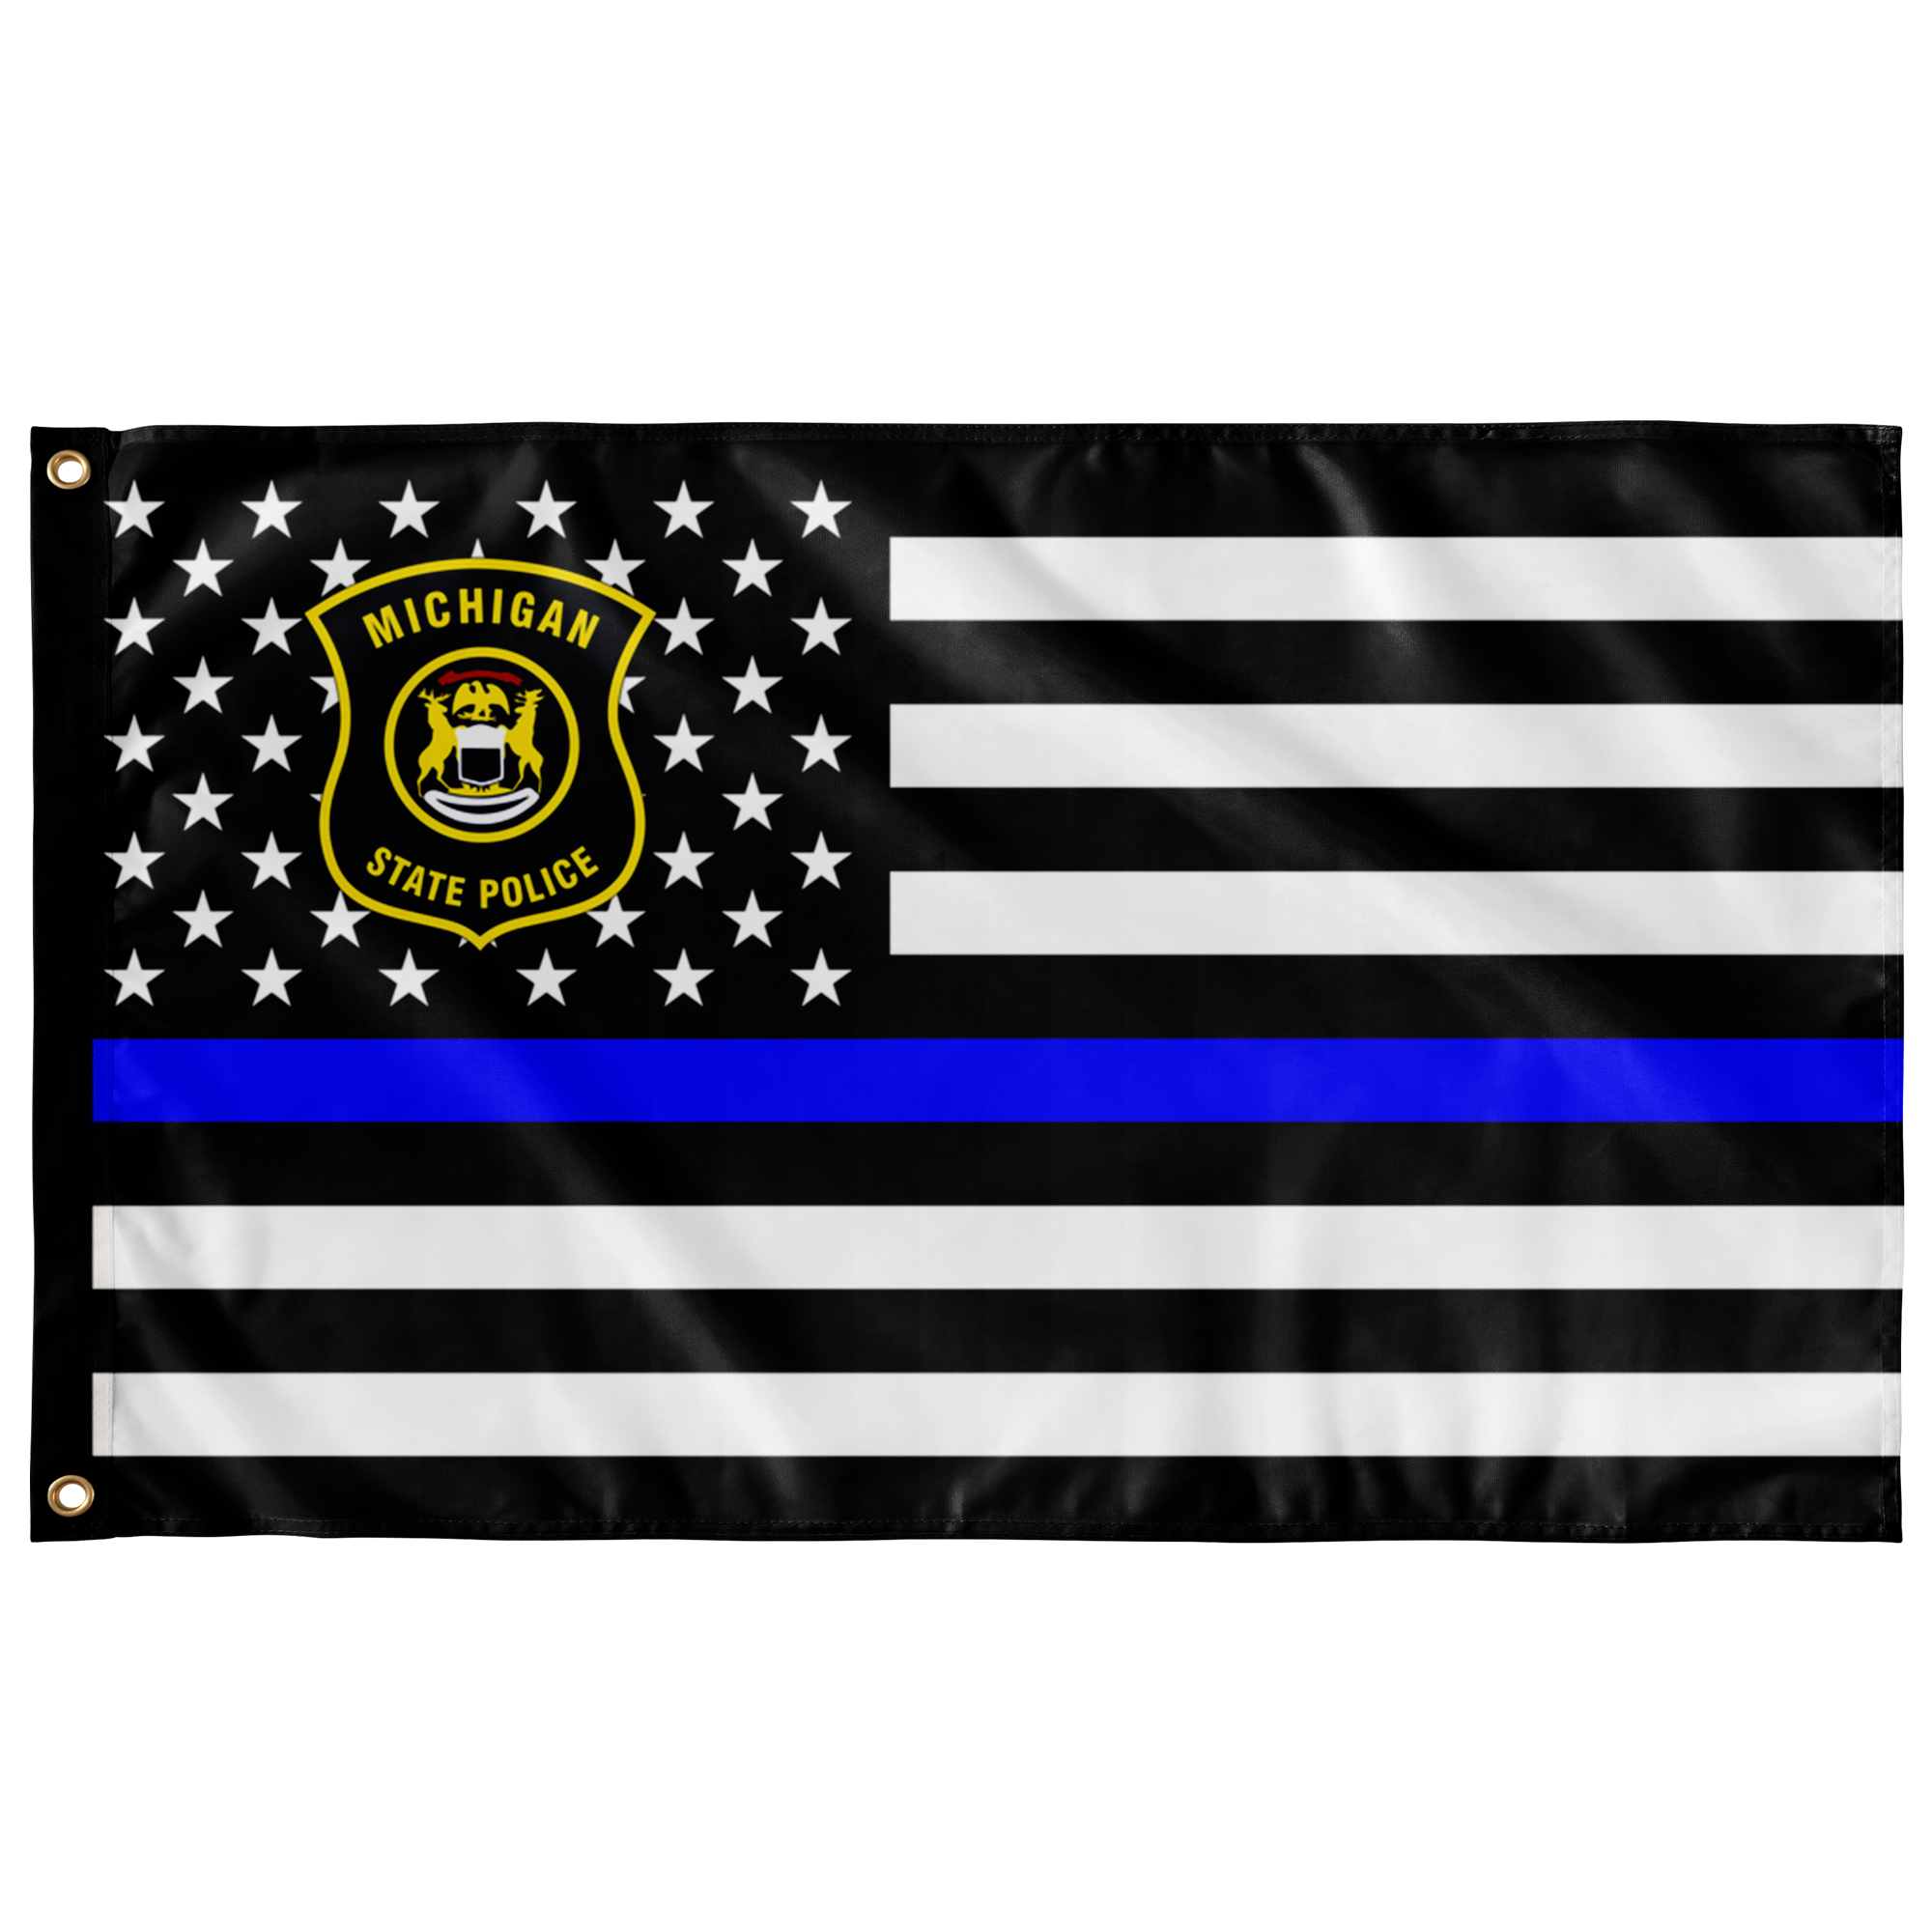 Michigan State Police Thin Blue Line Flag